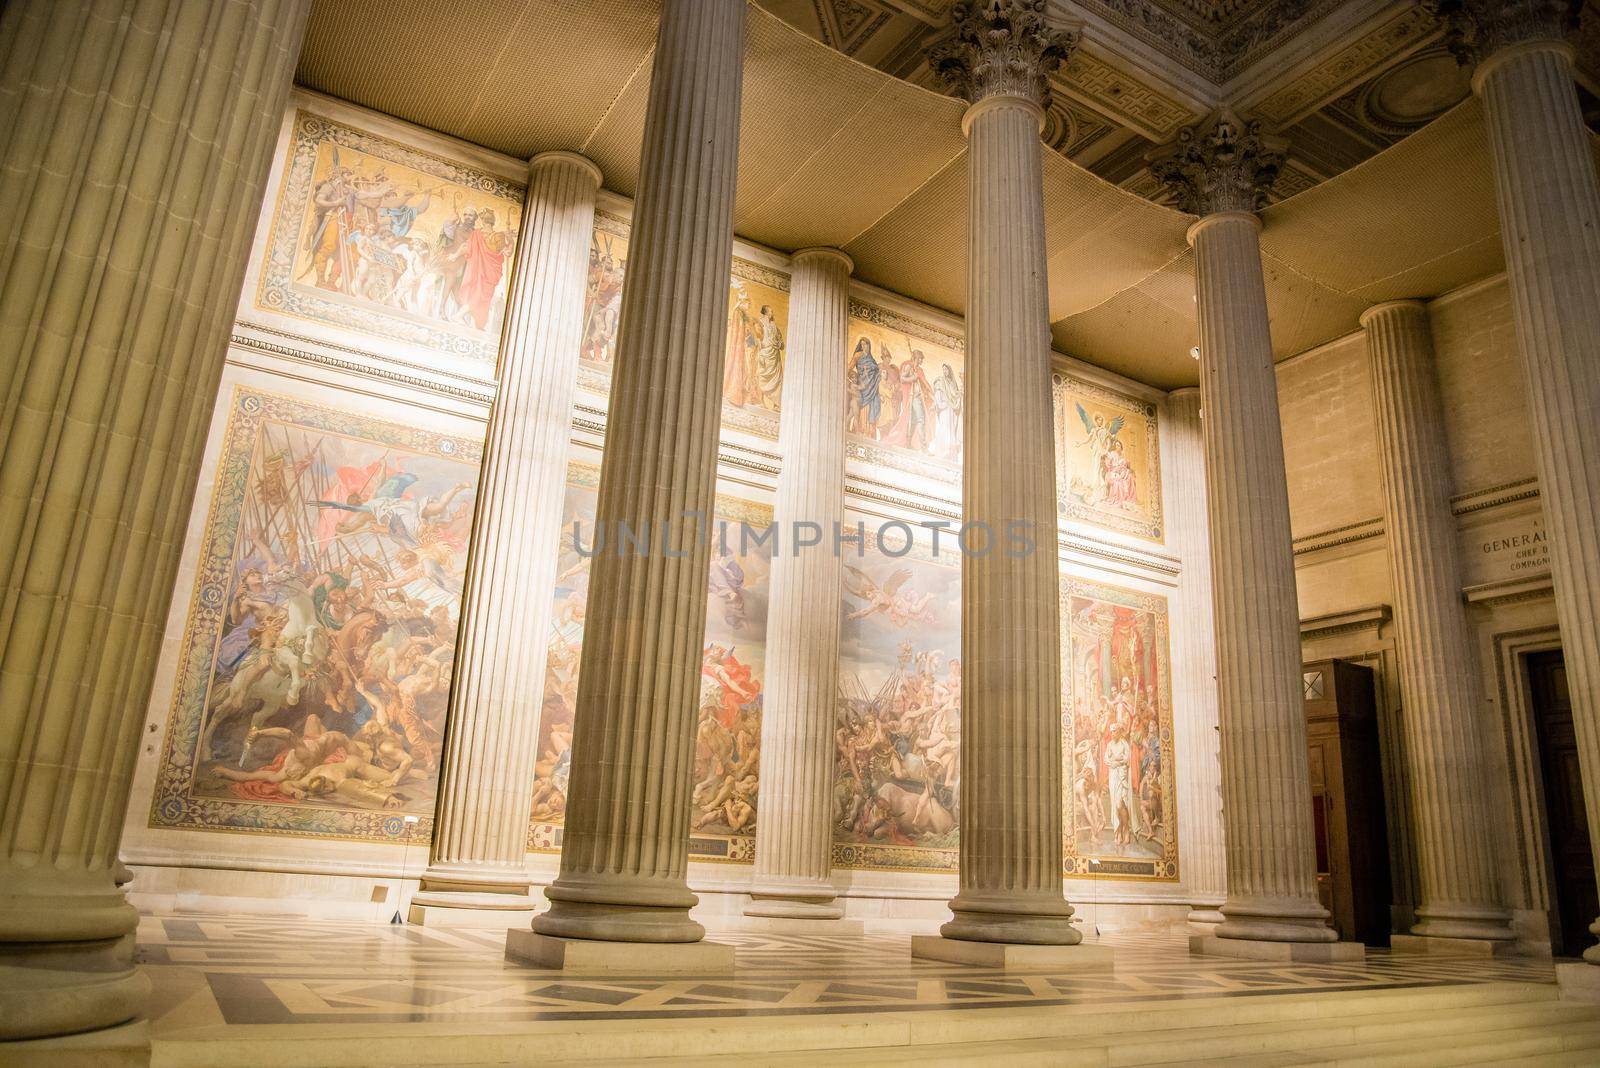 Paris, France - February 3, 2017: Interior photo of tall pillars with colorful glowing art murals in the background in a Paris art museum.